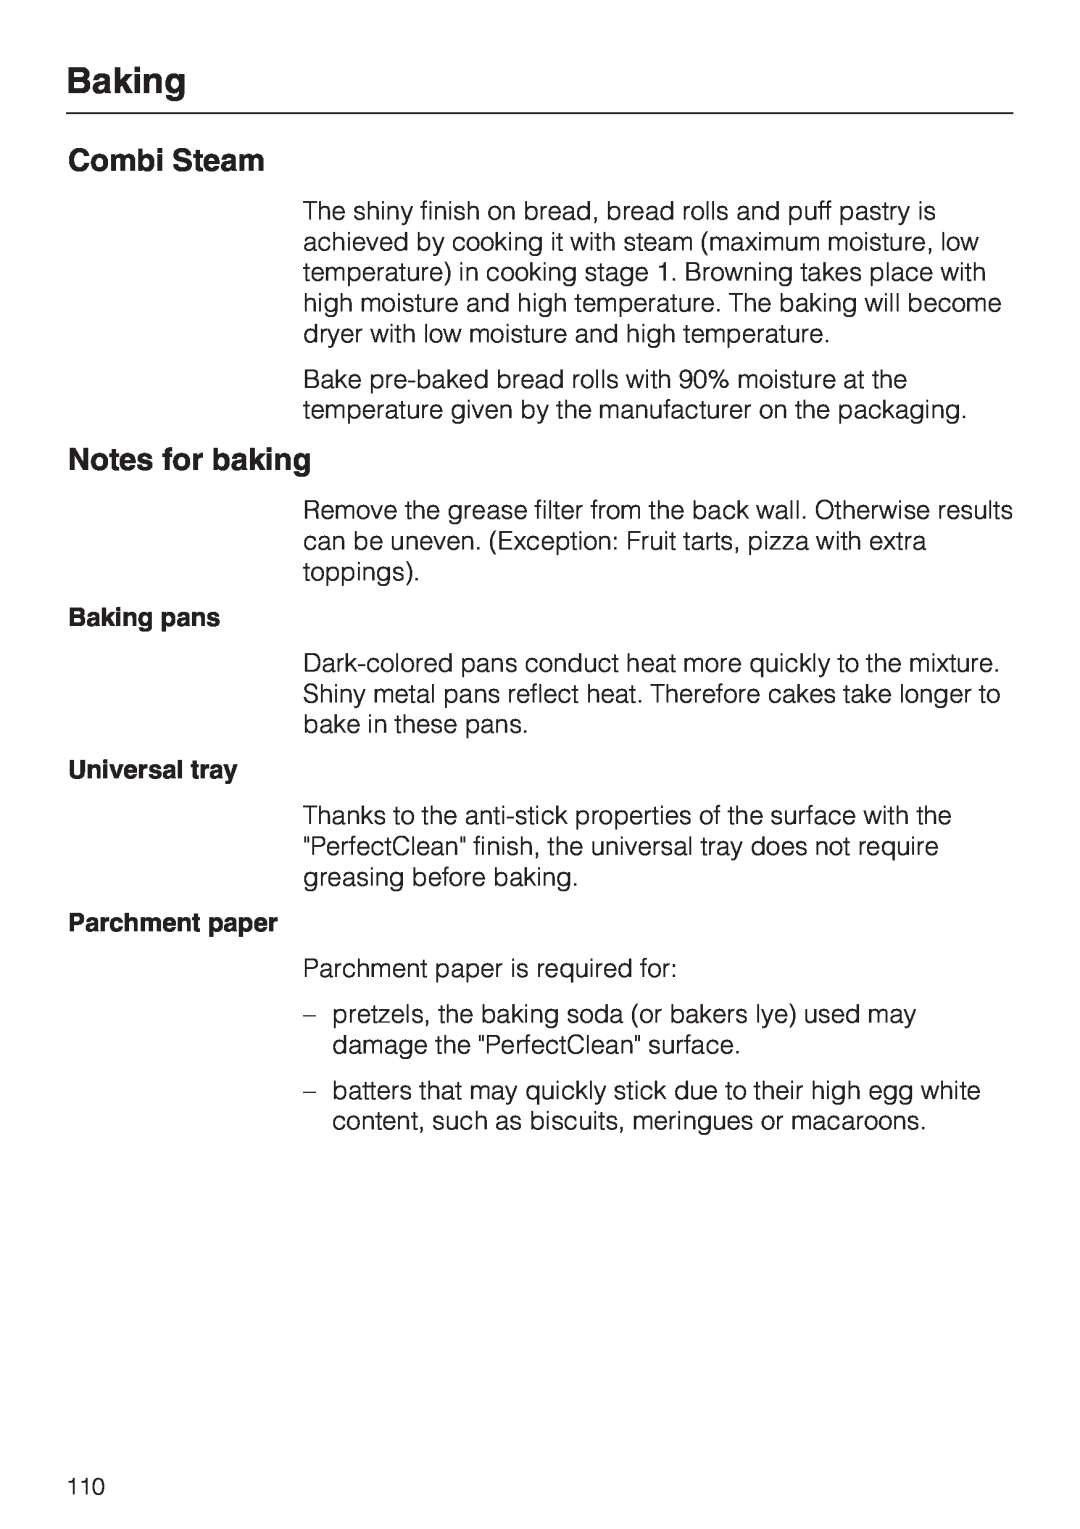 Miele 09 855 050 installation instructions Notes for baking, Combi Steam, Baking pans, Universal tray, Parchment paper 